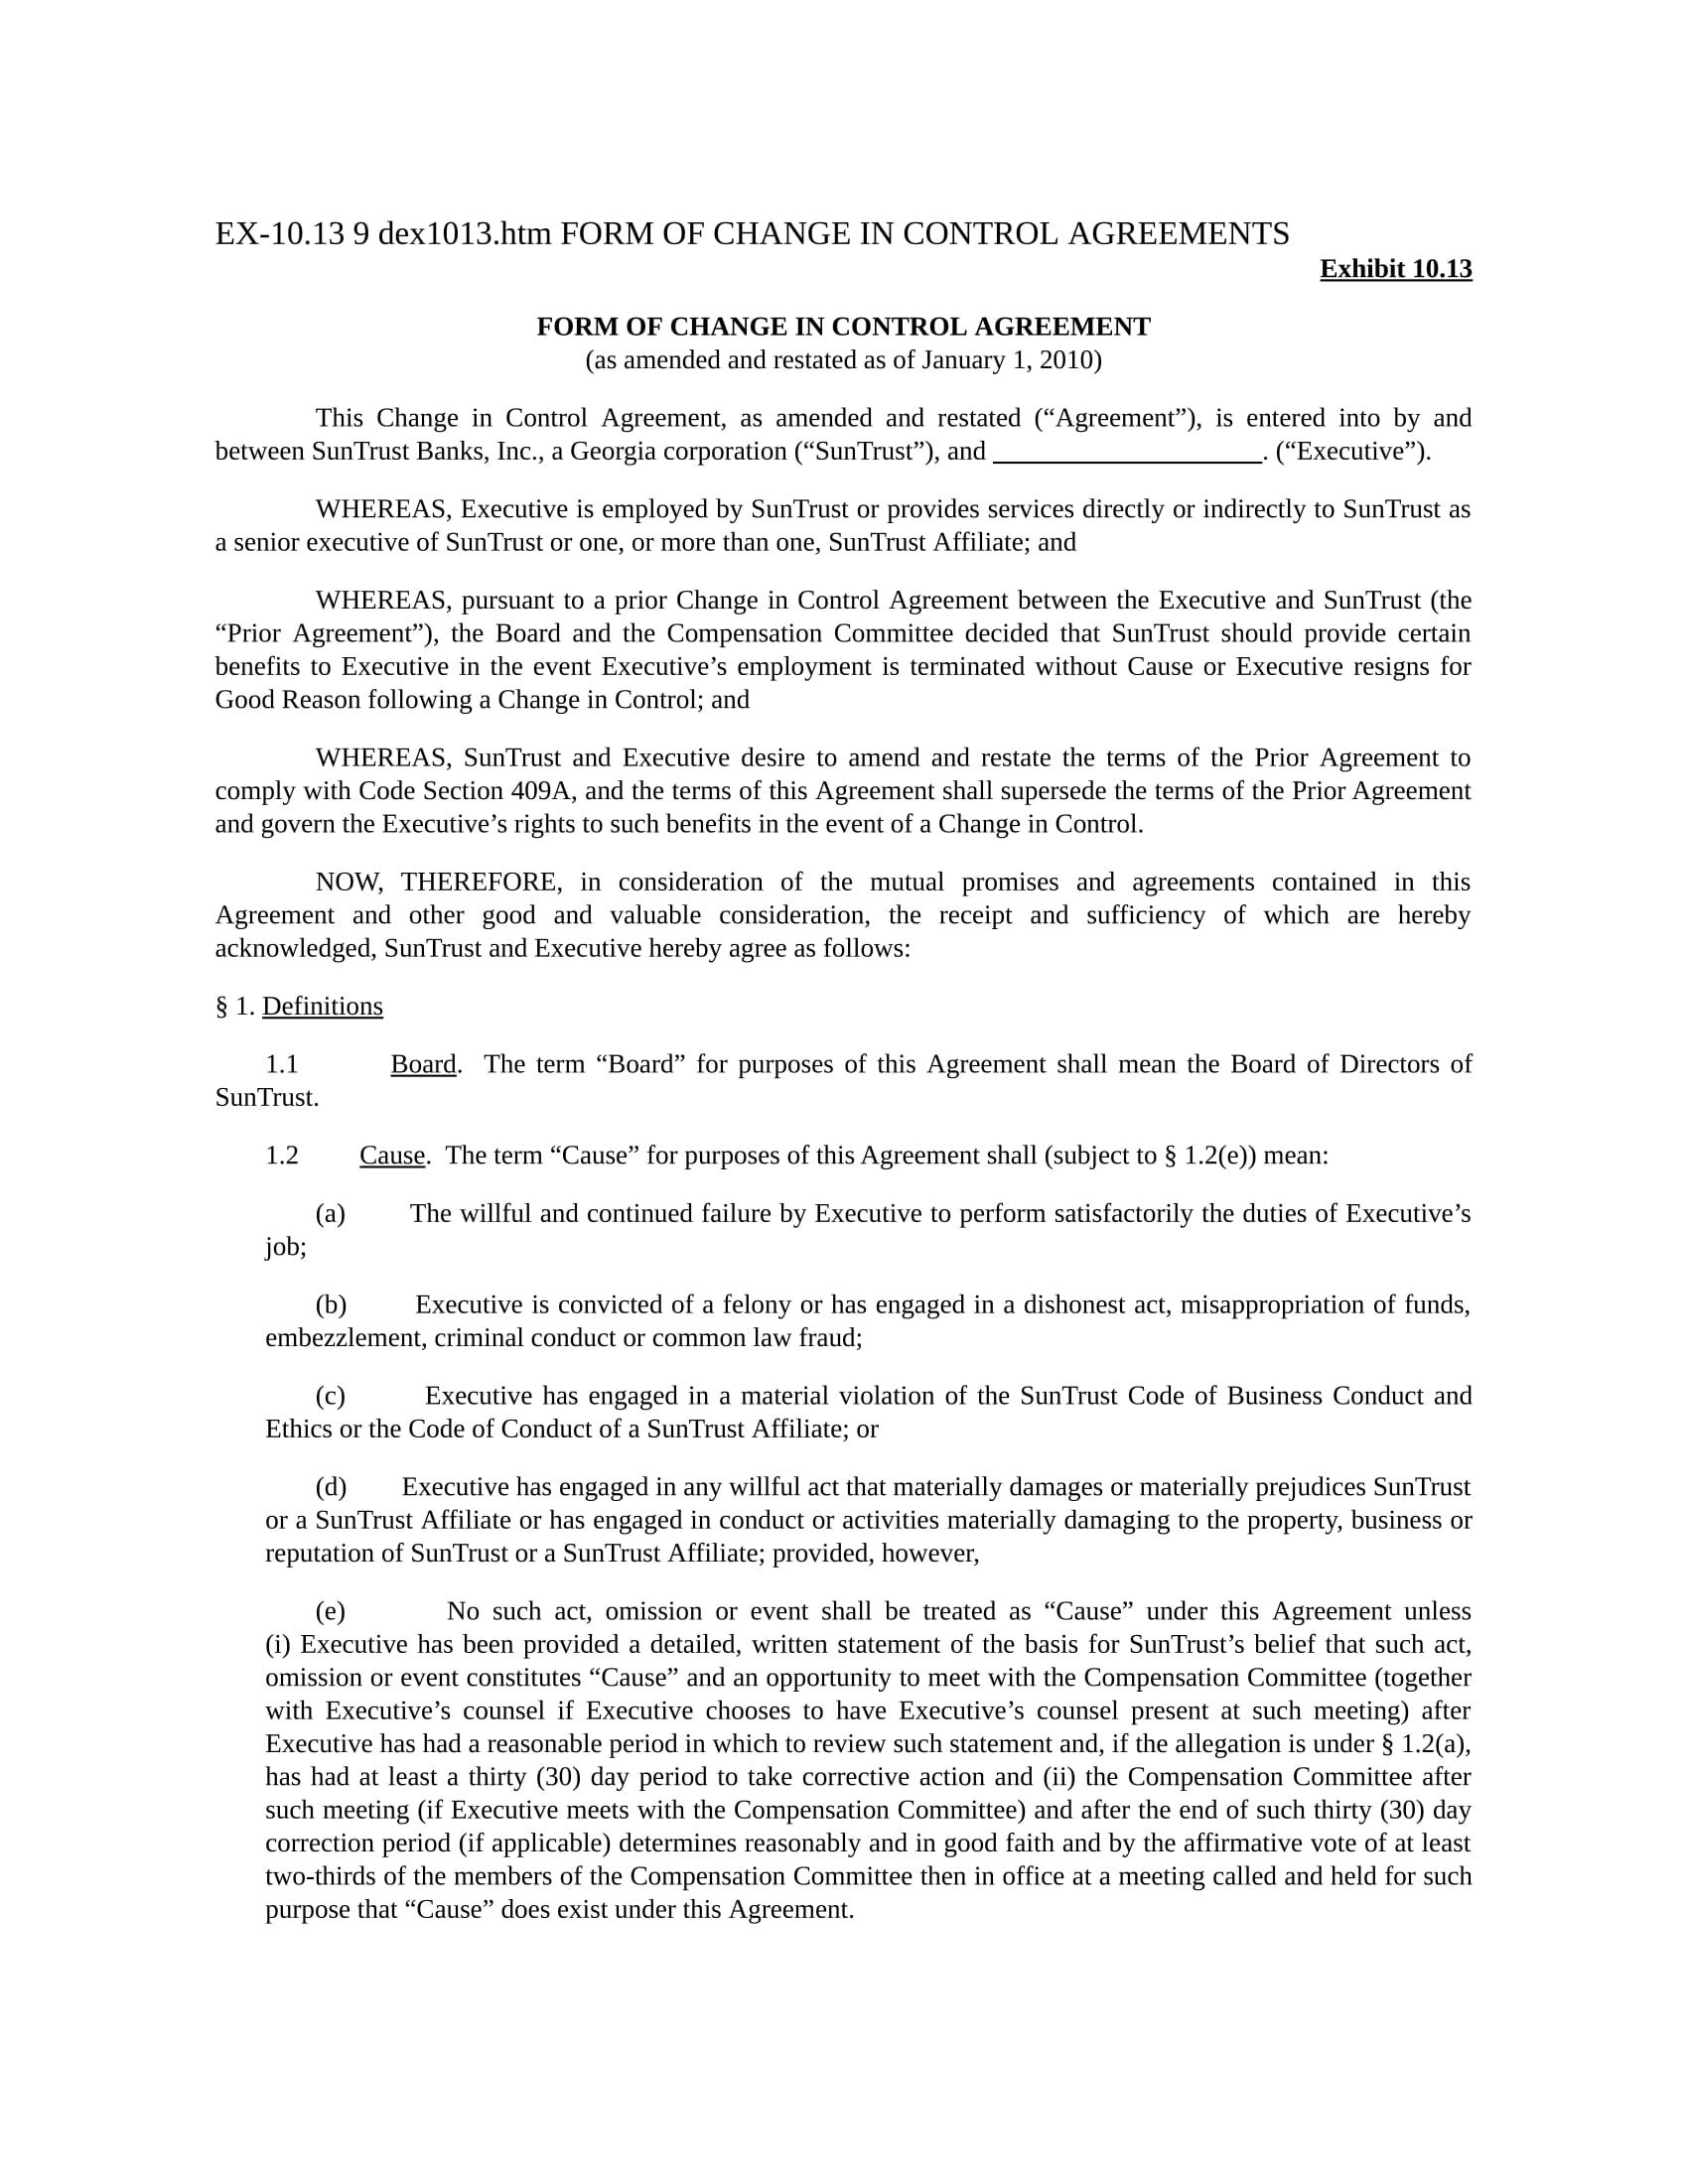 change in control agreement form 01